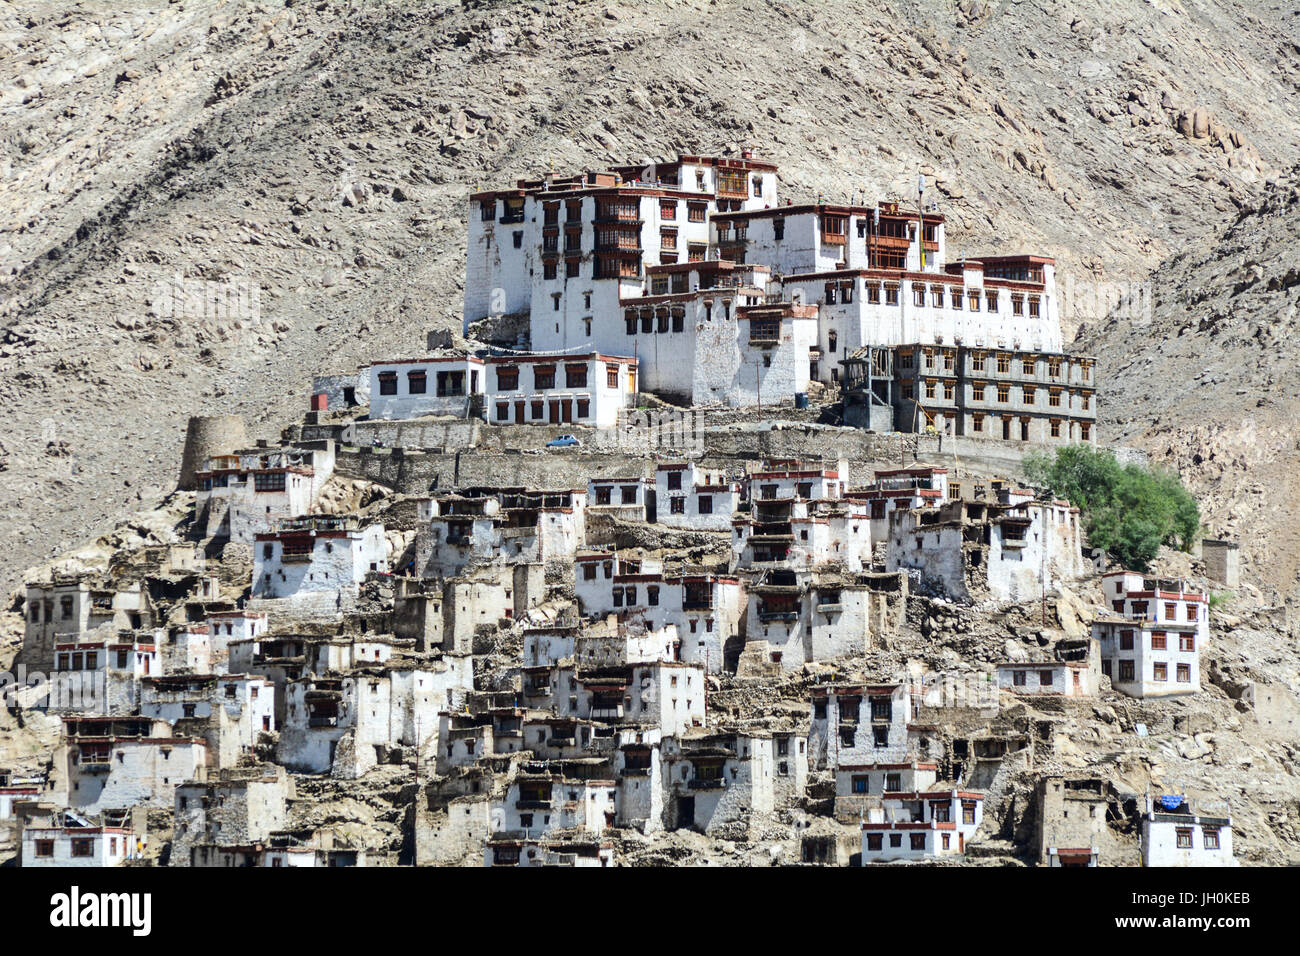 View of Thiksey Gompa in Ladakh, India. The Monastery is noted for its resemblance to the Potala Palace in Lhasa, Tibet and is the largest gompa in ce Stock Photo